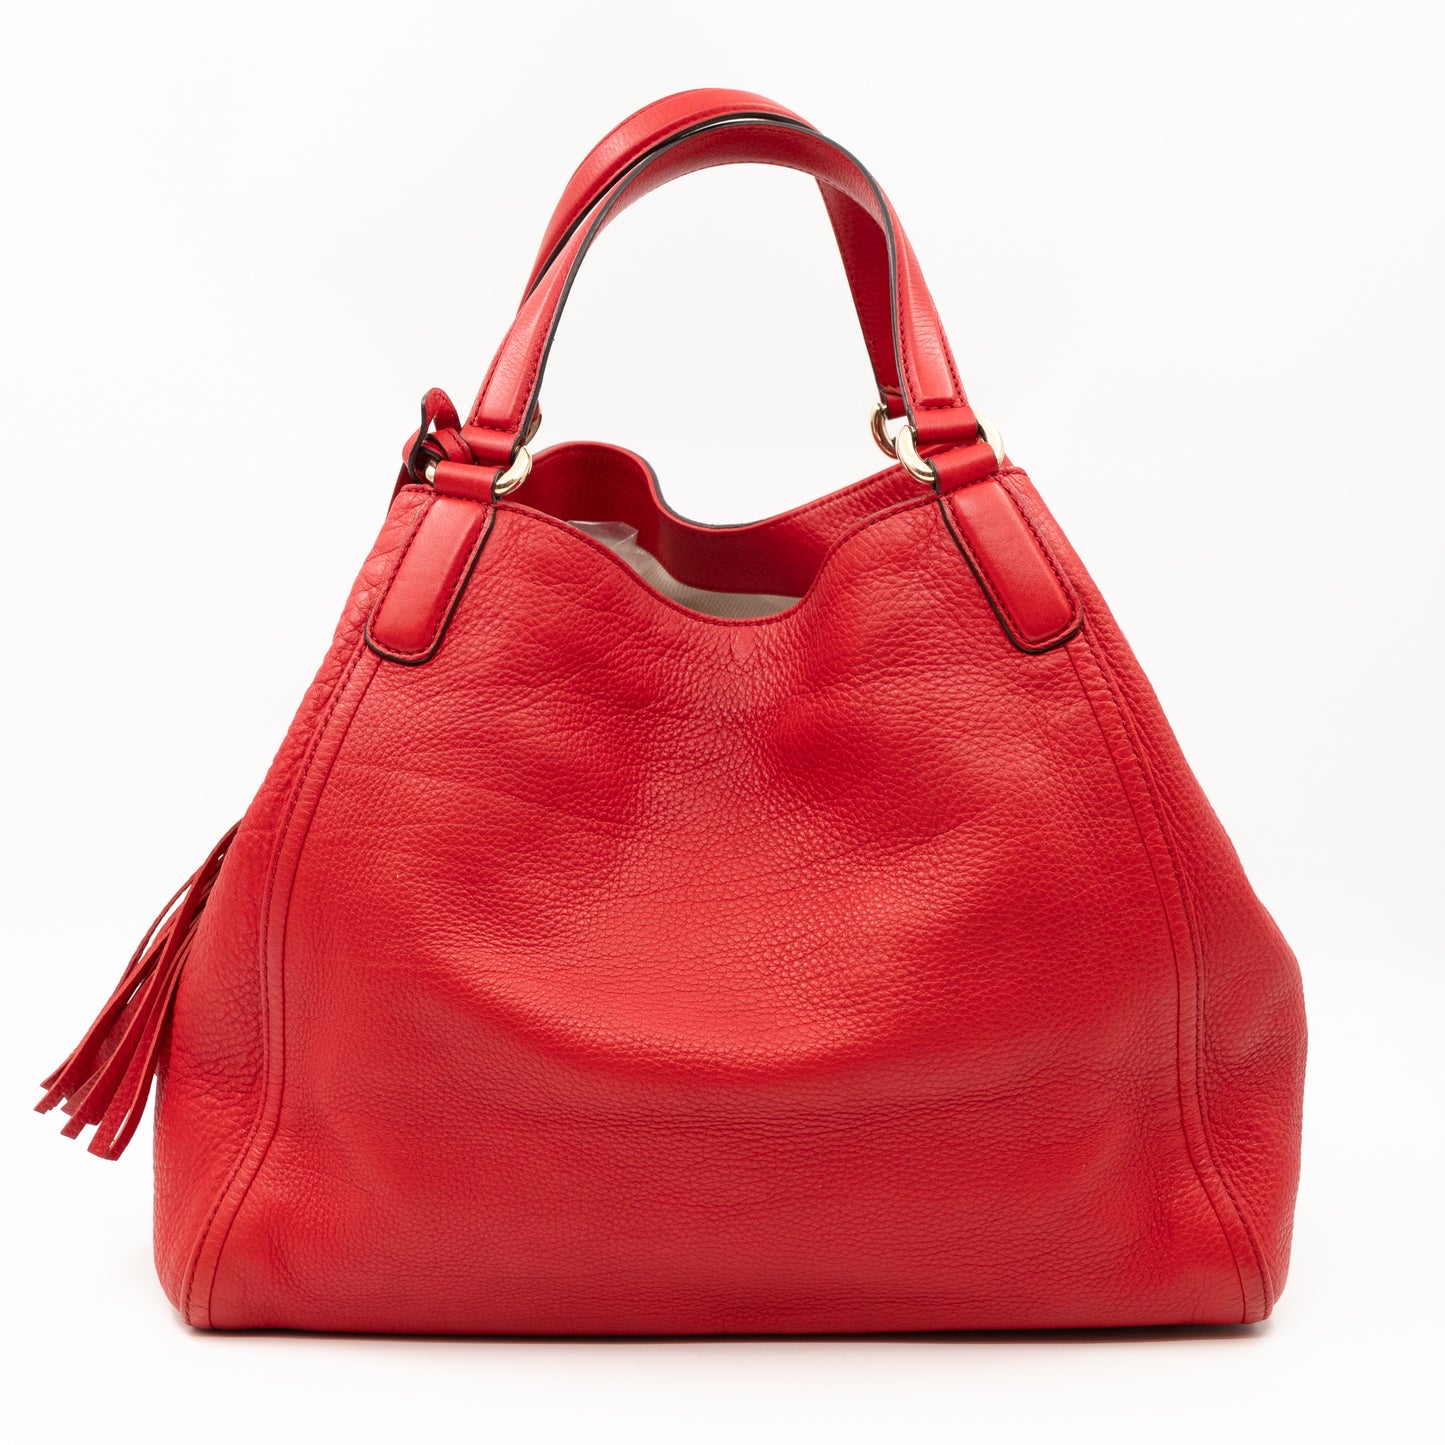 Soho Shoulder Tote Red Leather